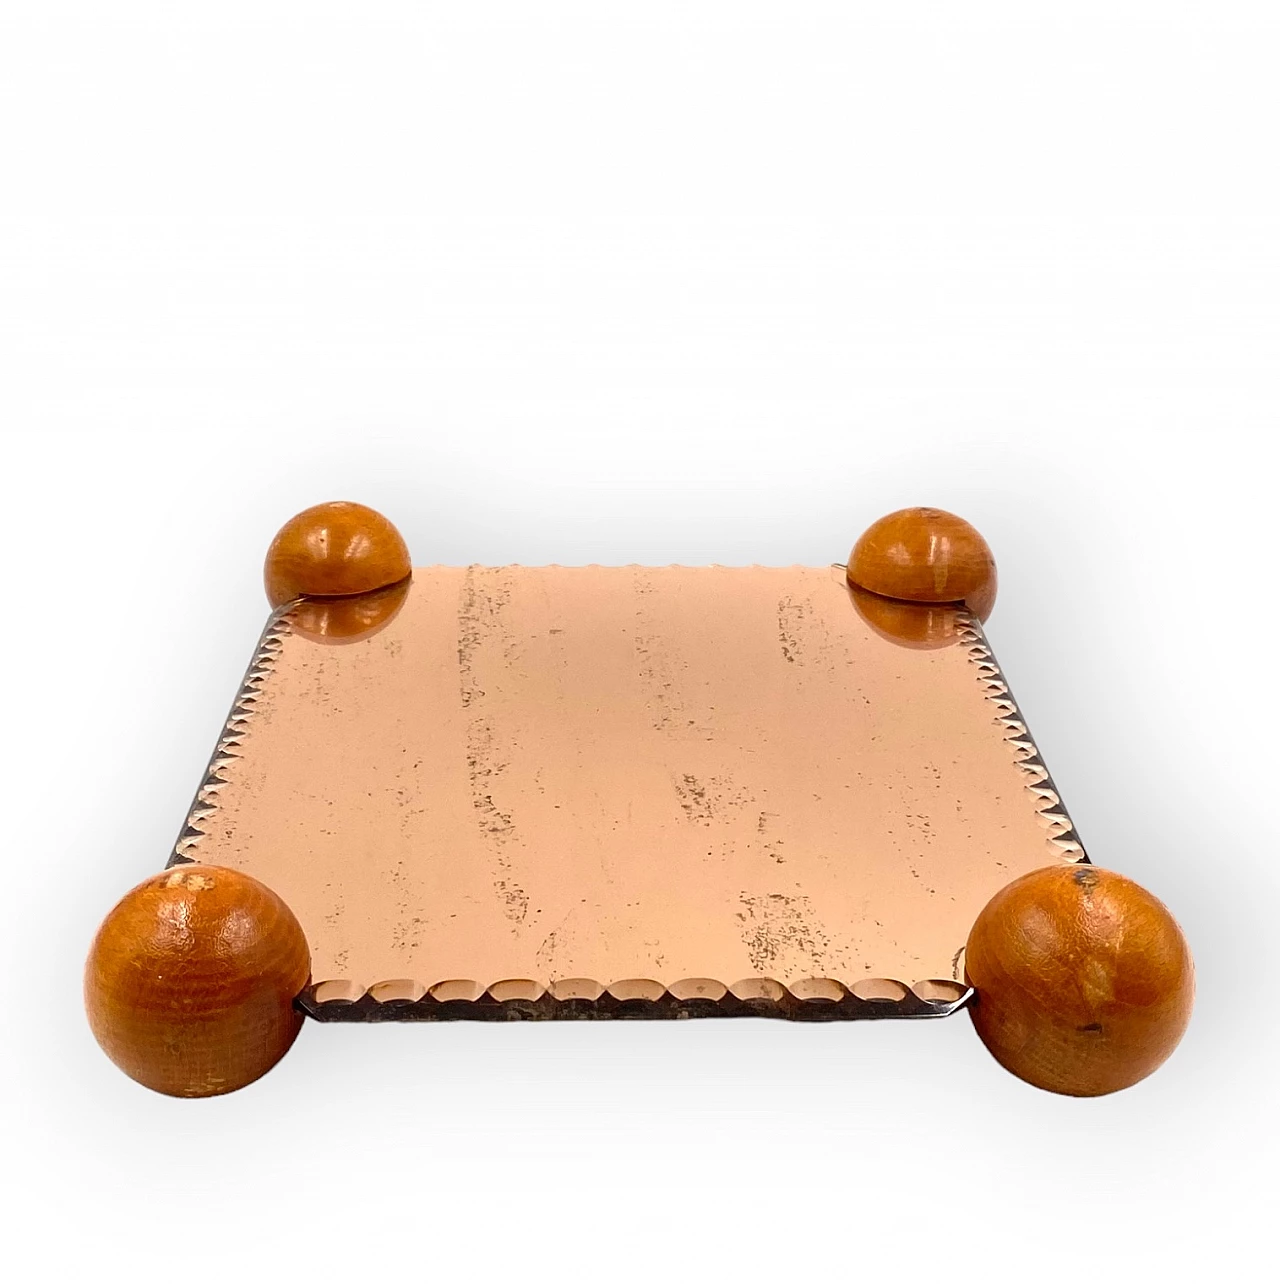 Pink mirrored tray with wooden spheres at the corners, 1950s 20